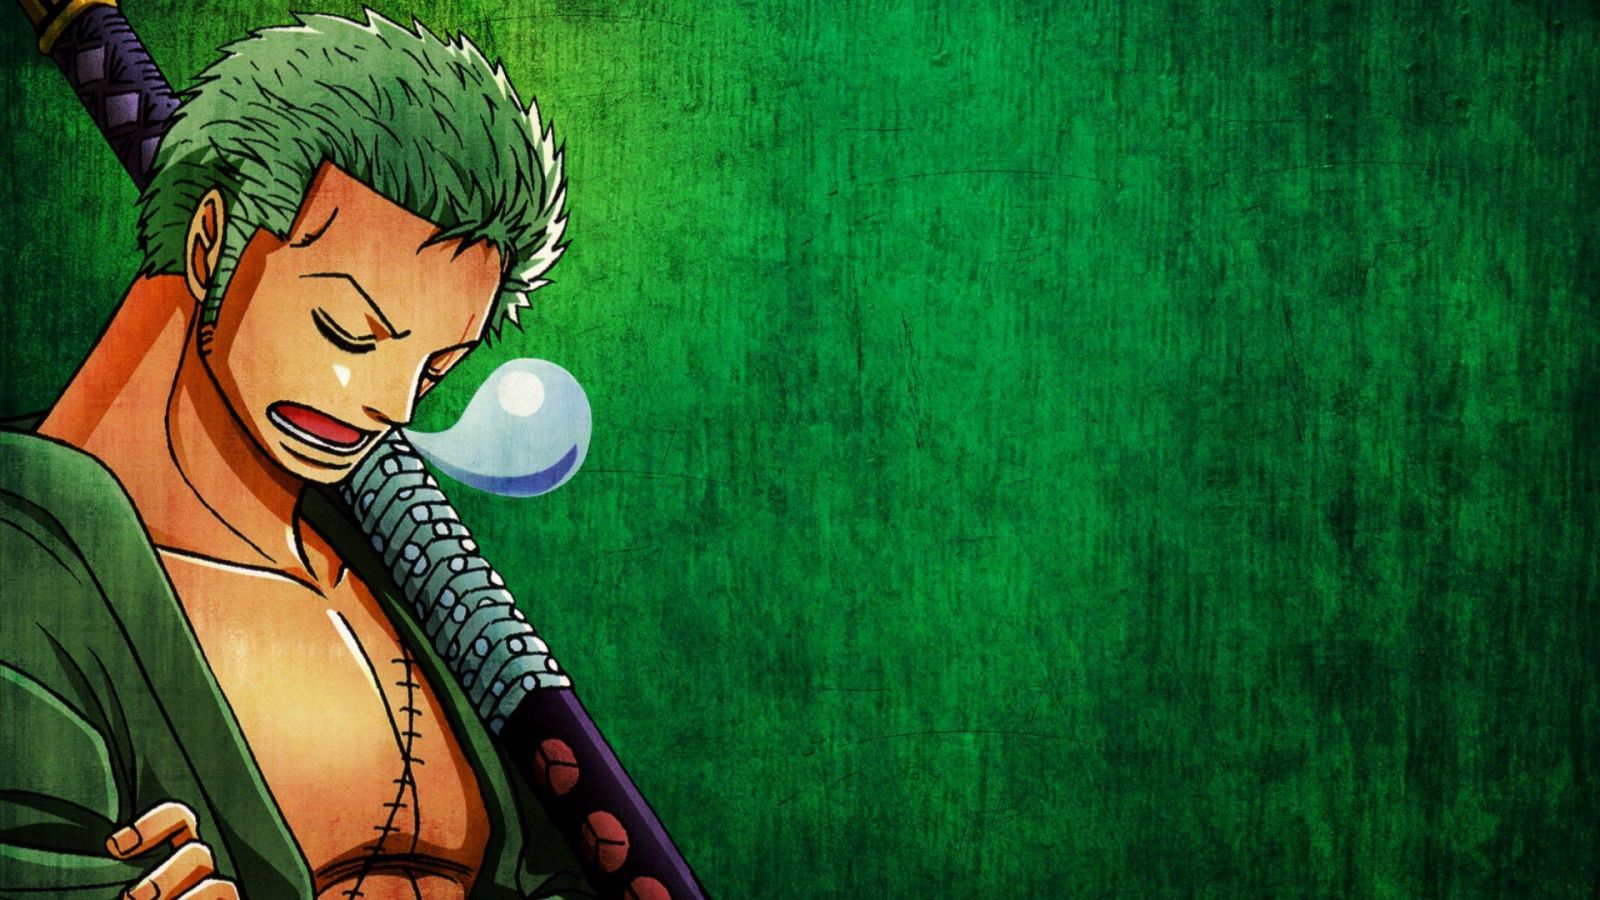 Free download One Piece anime Roronoa Zoro wallpaper 1920x1080 289614 [1920x1080] for your Desktop, Mobile & Tablet. Explore Roronoa Zoro Wallpaper. Roronoa Zoro Wallpaper, Roronoa Zoro HD Wallpaper, Zoro Wallpaper